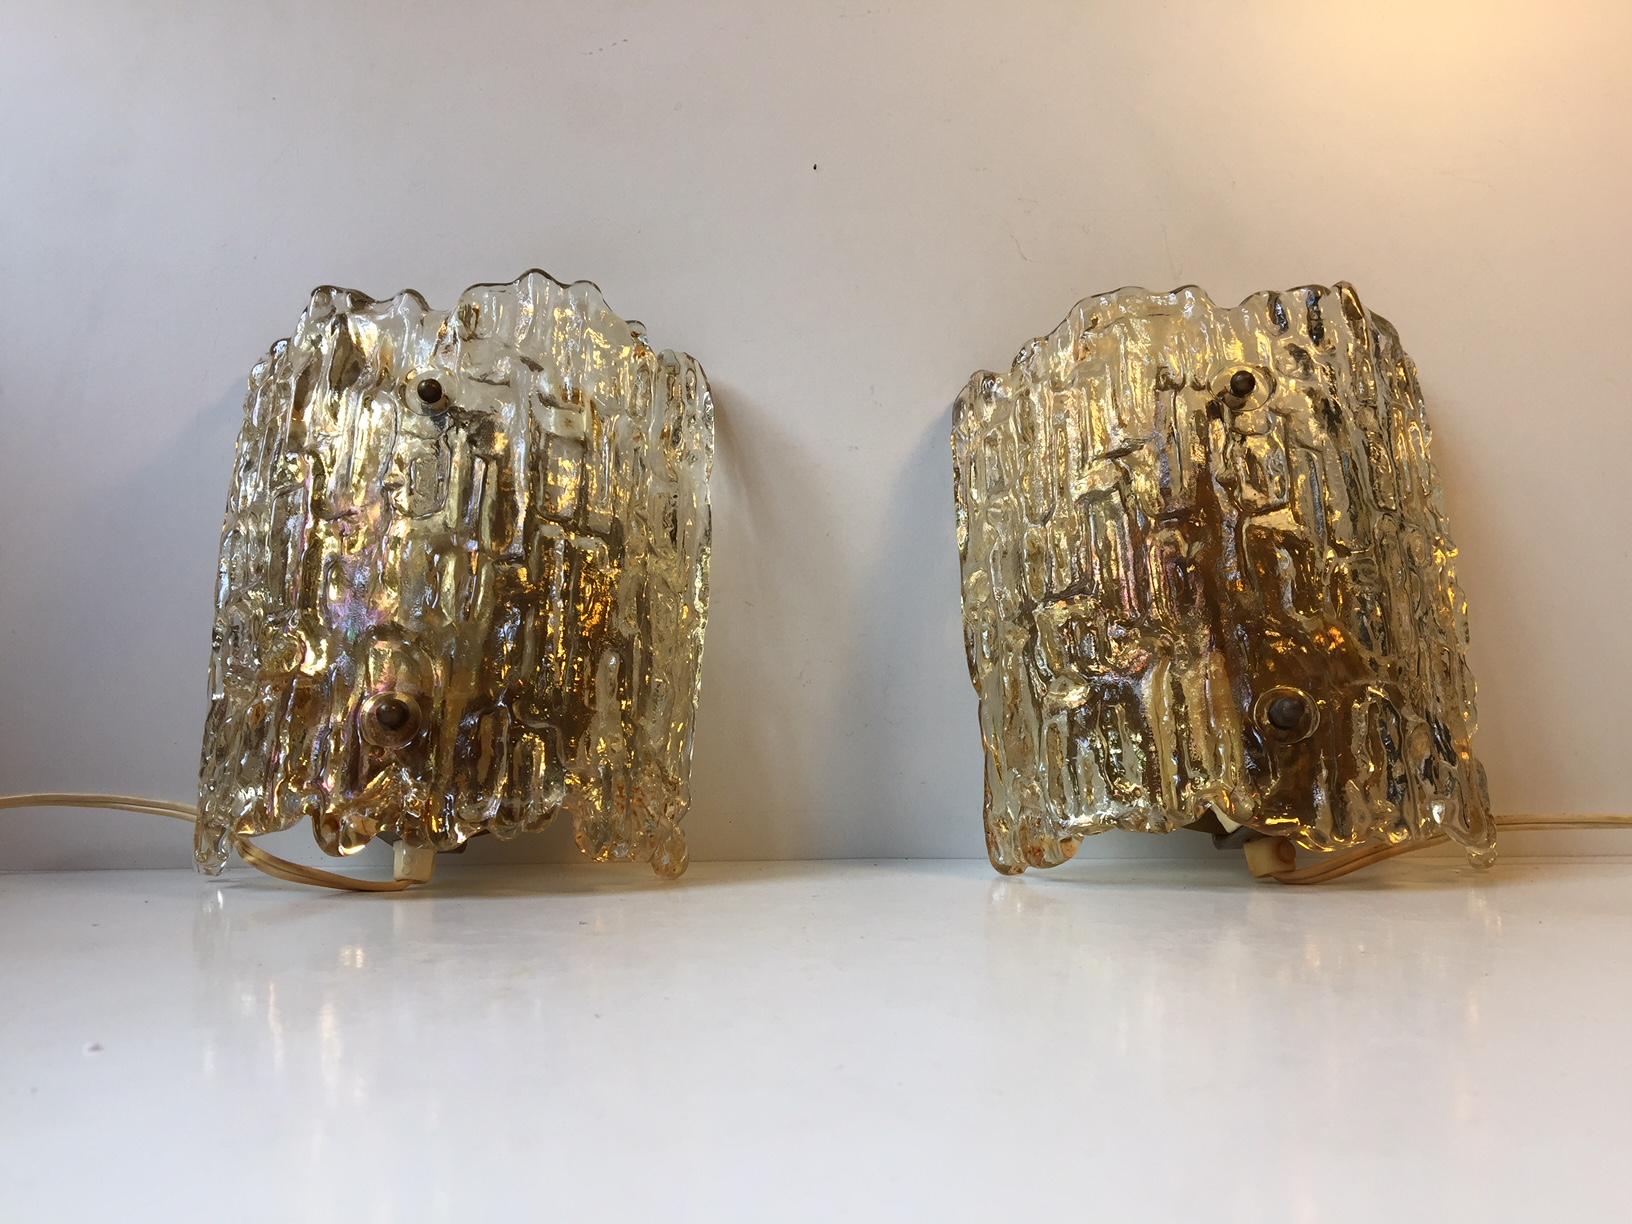 This pair of Mid-Century Modern sconces by Carl Fagerlund was manufactured by Orrefors in the 1950s-1960s. The textured crystal shading creates a cosy and soft lighting. The set features brass mounts and screws and is in working condition.